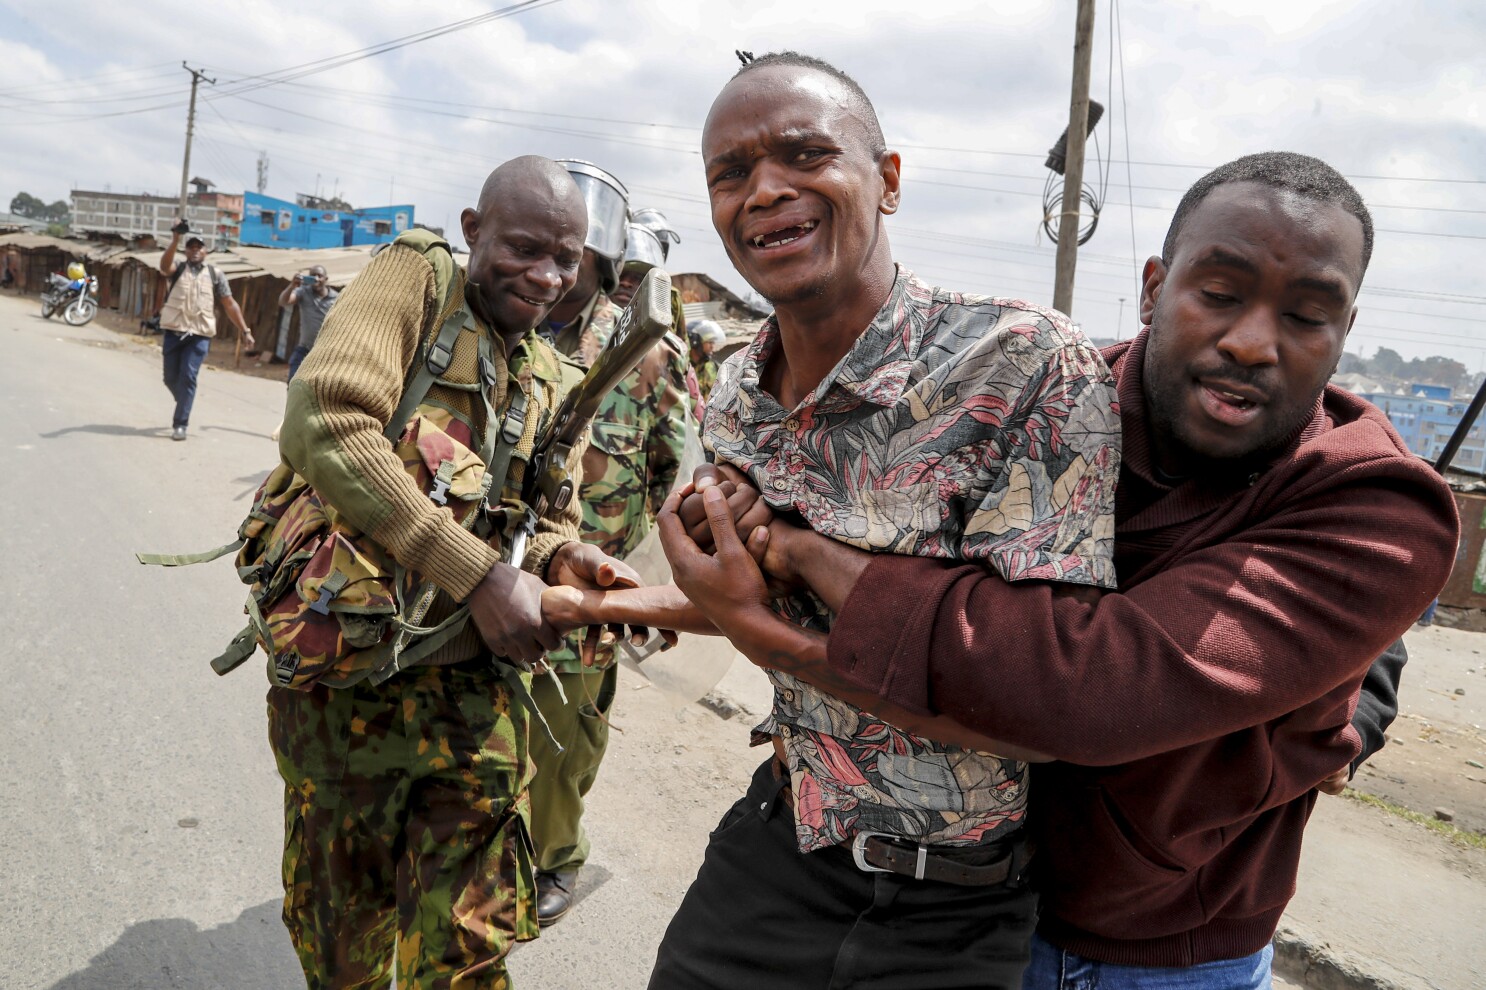 Kenya police are told not to report deaths during protests. A